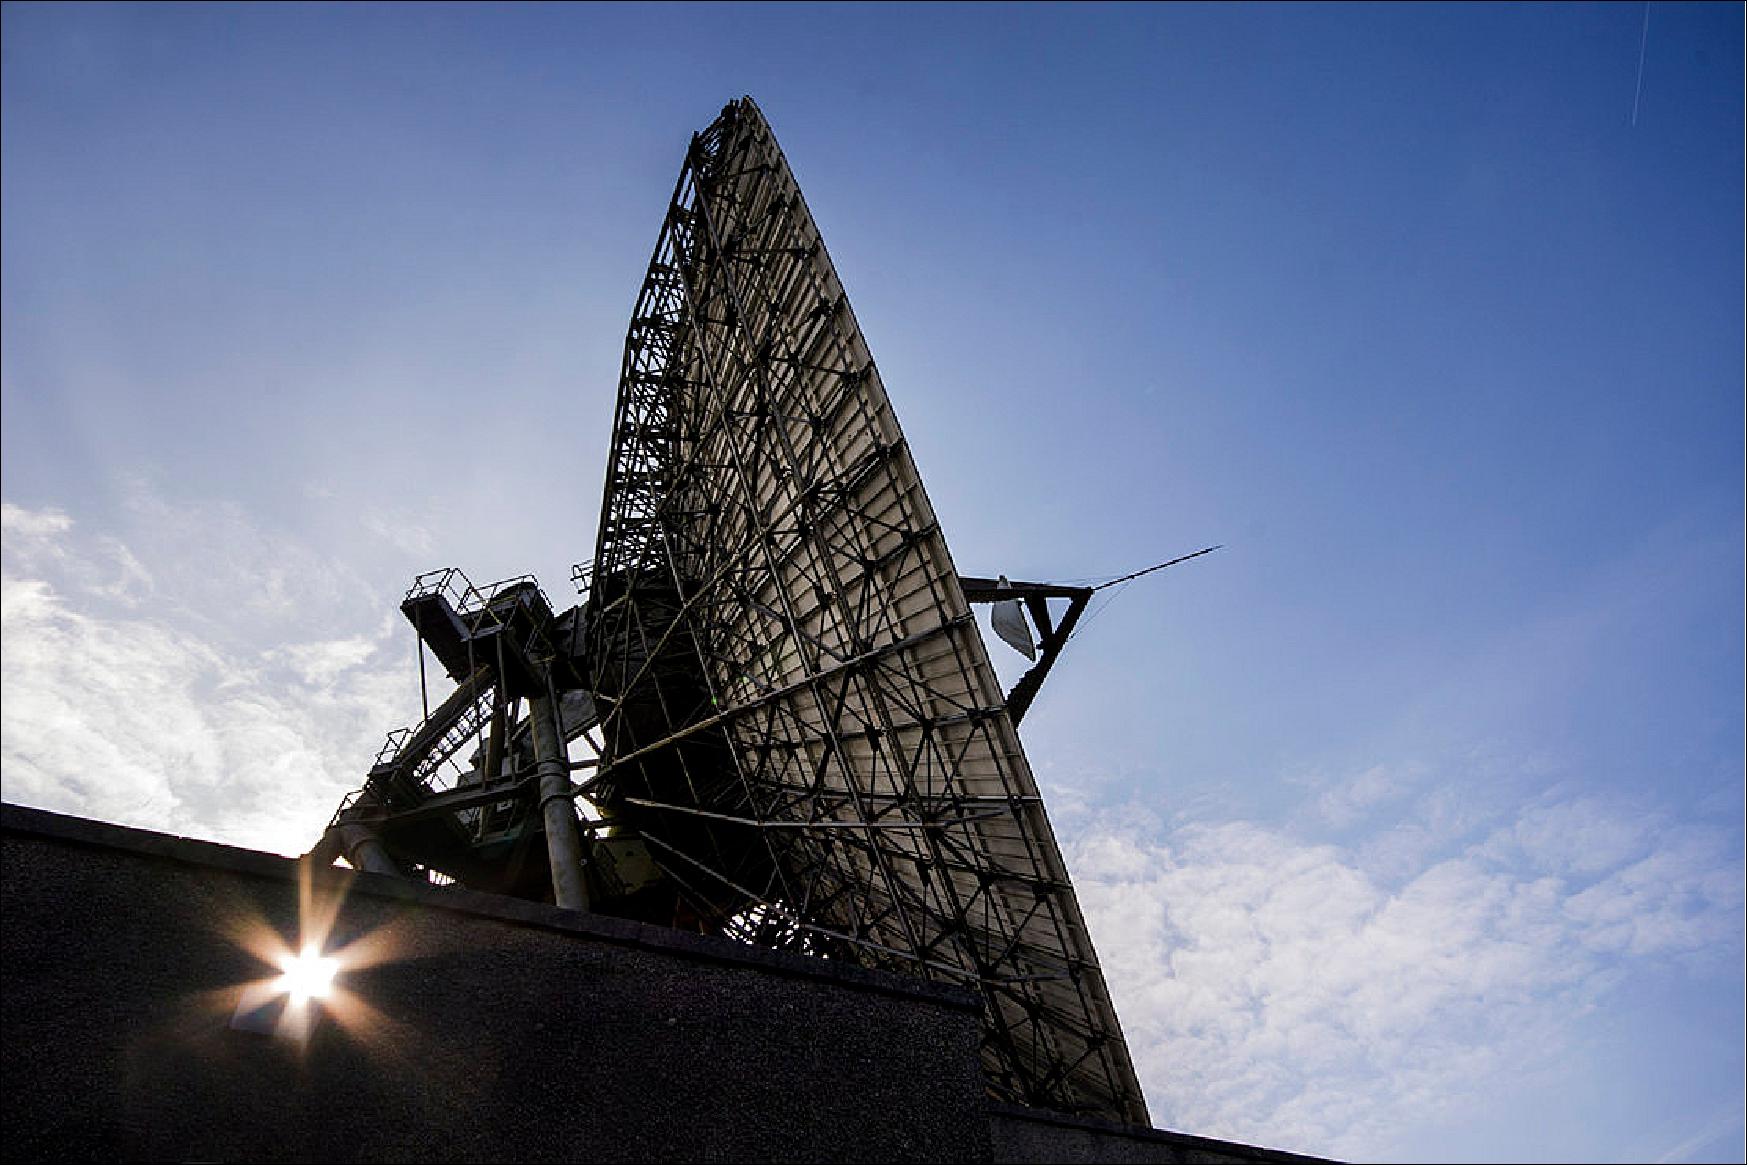 Figure 118: Photo of the Goonhilly Earth Station (image credit: GES Ltd)